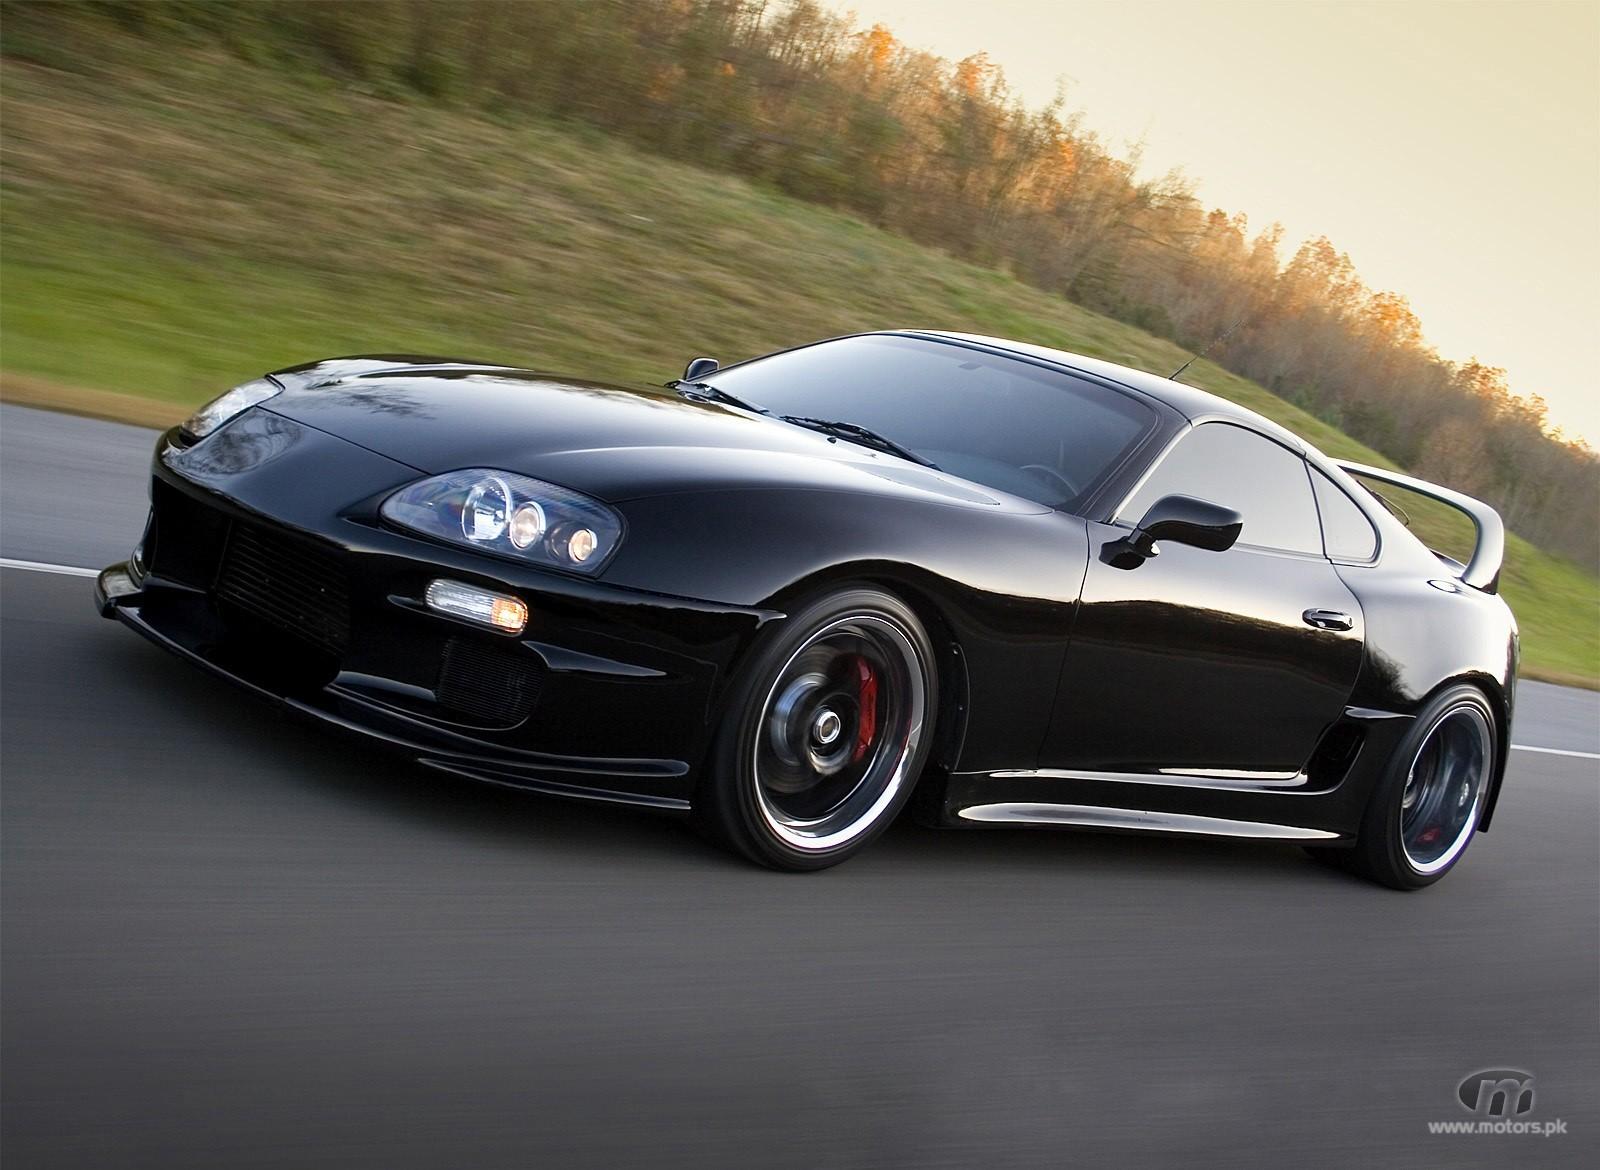 Toyota Supra Mk4 Front Car Pictures Car Wallpapers Sport Car Images ...